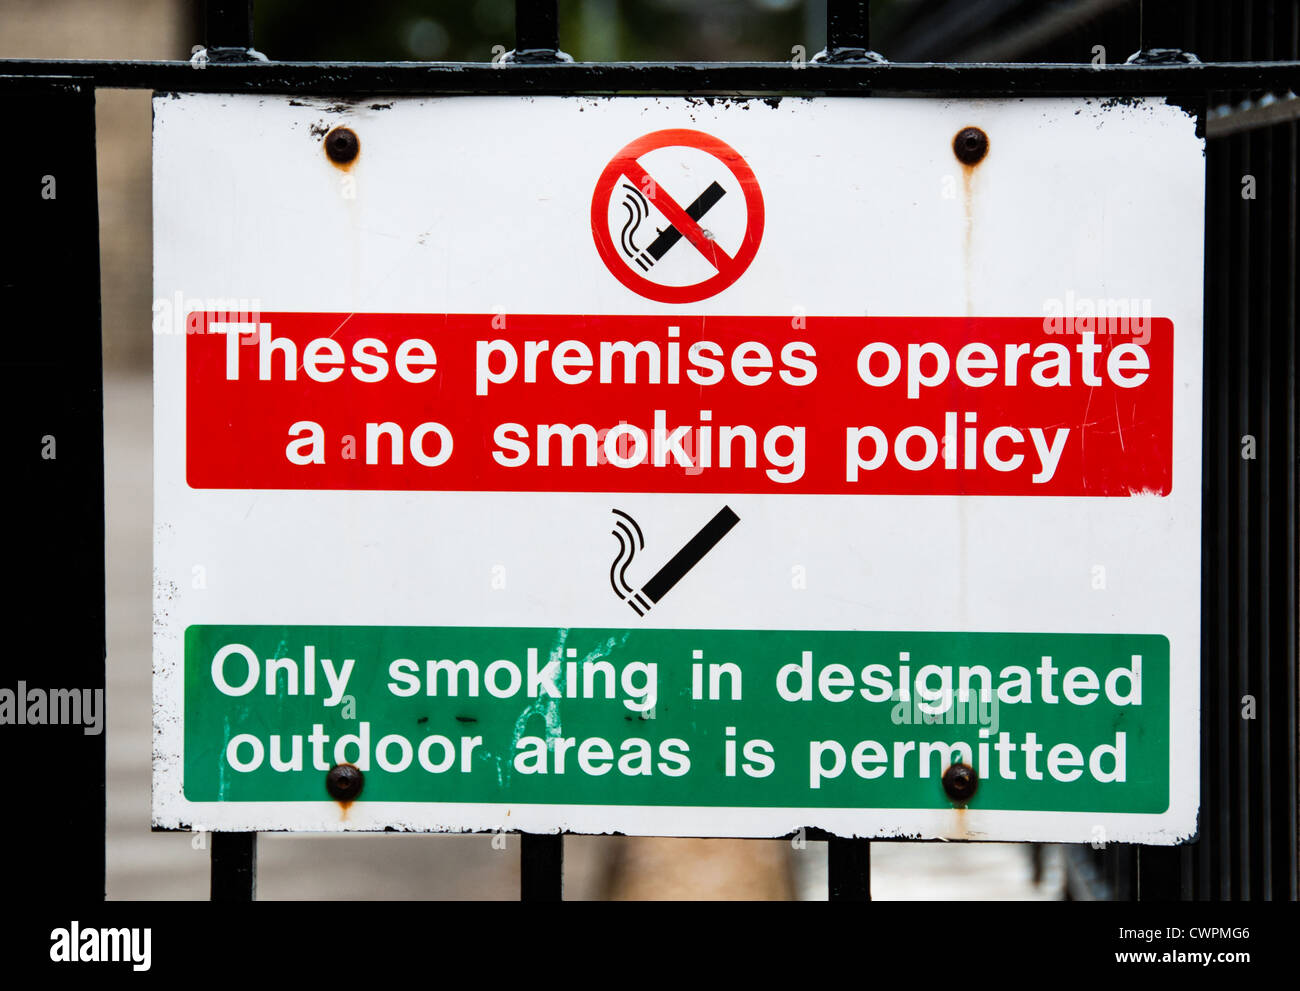 These premises operate a no smoking policy, only smoking in designated outdoor areas permitted Stock Photo